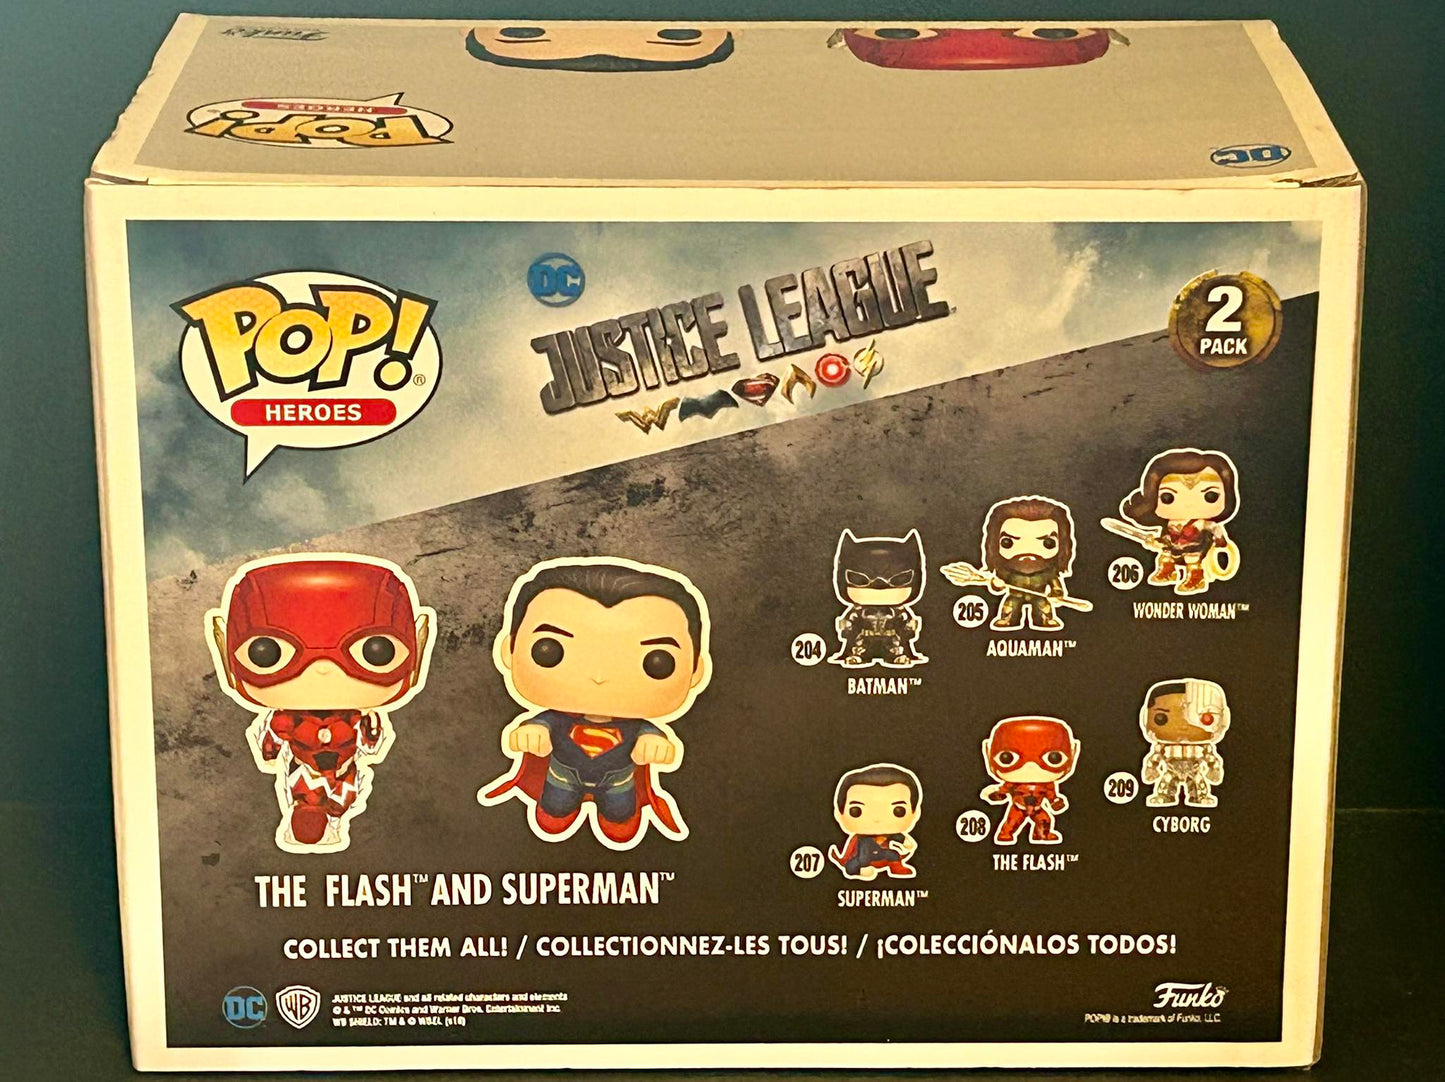 Figurine Pop Justice League [DC] The Flash & Superman - Racing - 2 Pack Fall Convention, New York Comic Con [NYCC]